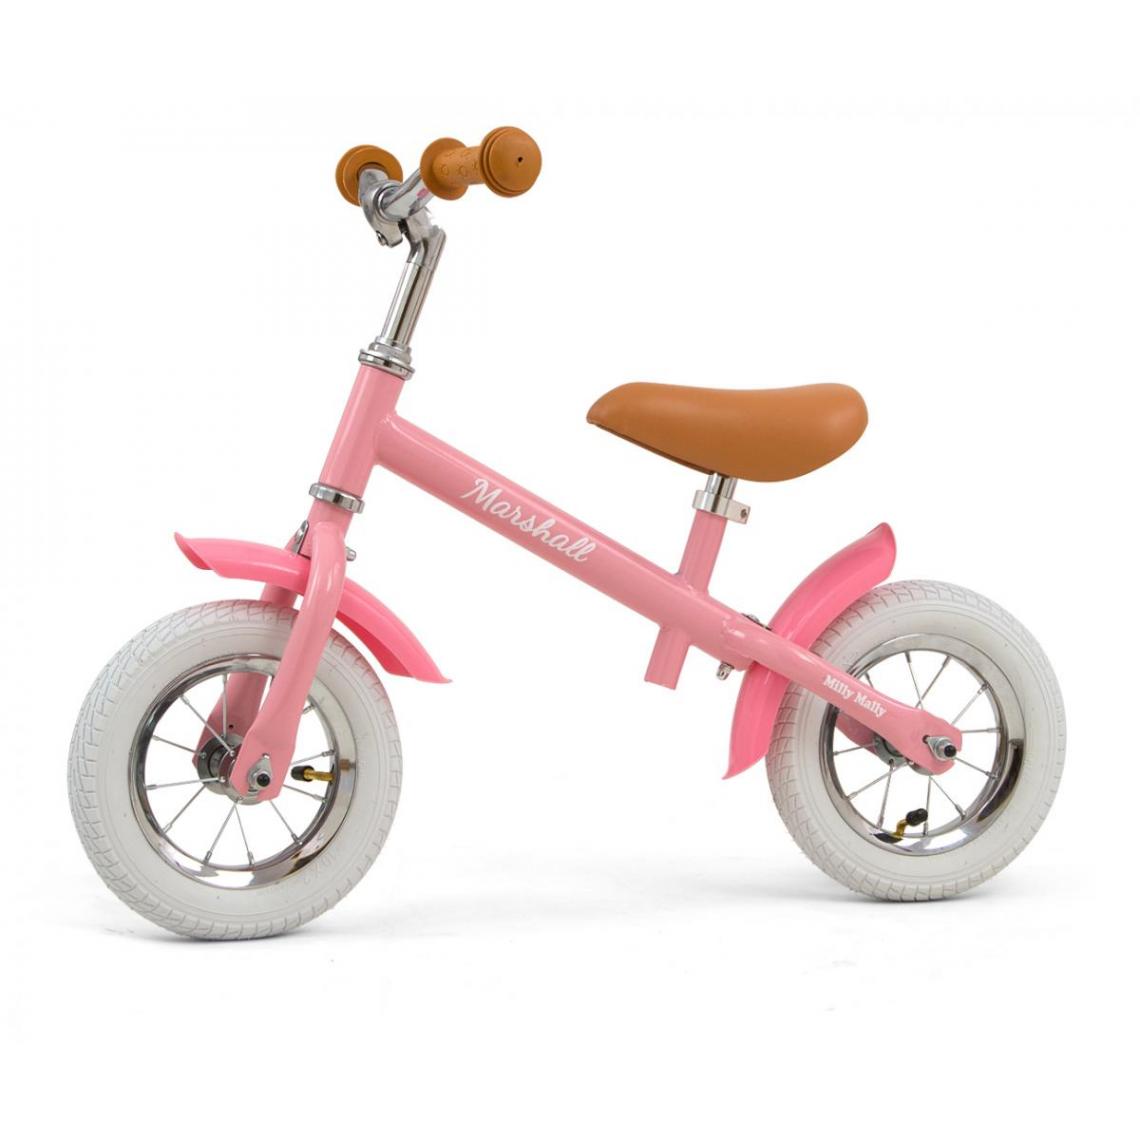 Milly Mally - Milly Mally Vélo de Marche Marshall Air Rose - Tricycle